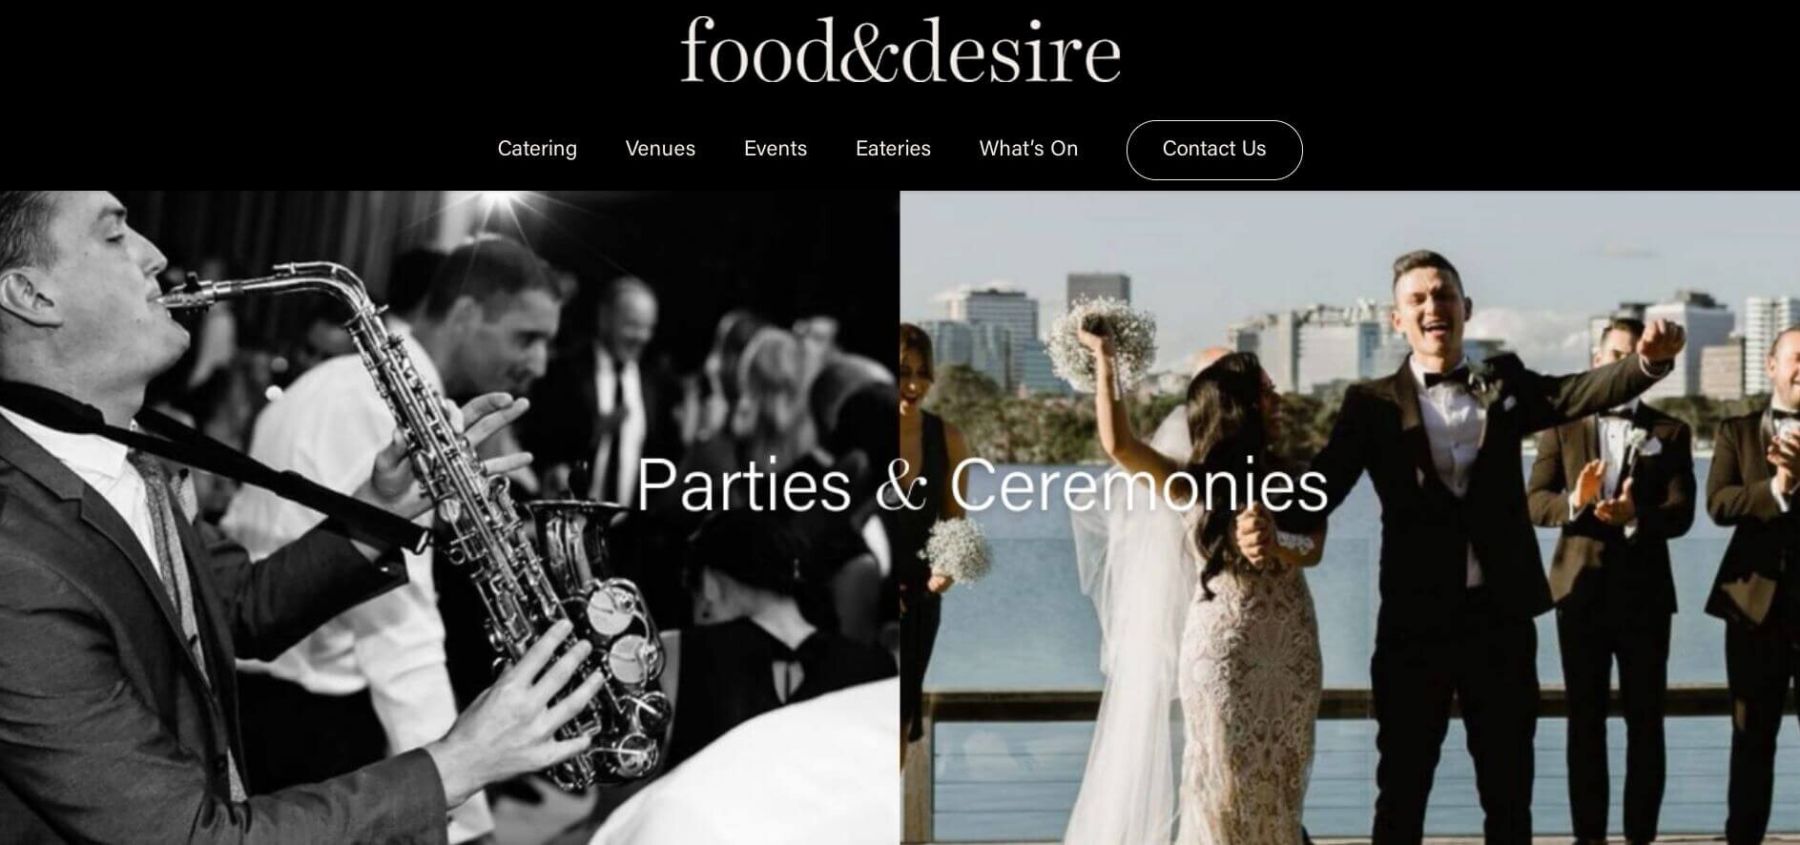 Top 50 Wedding Caterers in Melbourne [2021]  by Wild Romantic Photography Melbourne